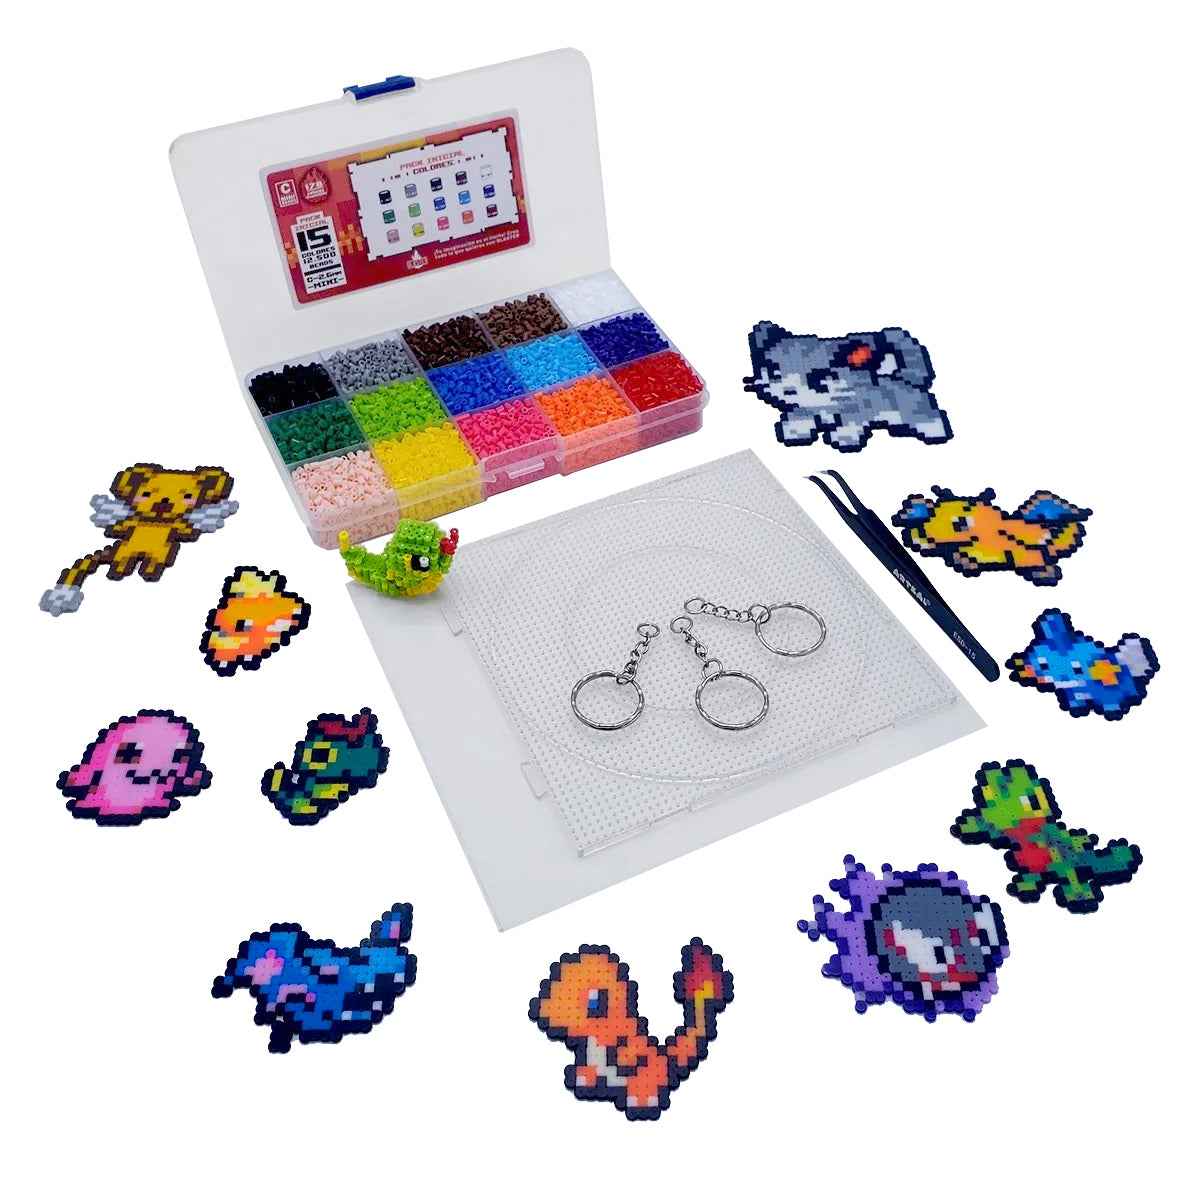 Pack Inicial 12.500 Hama Beads Artkal 2.6mm + Accesorios